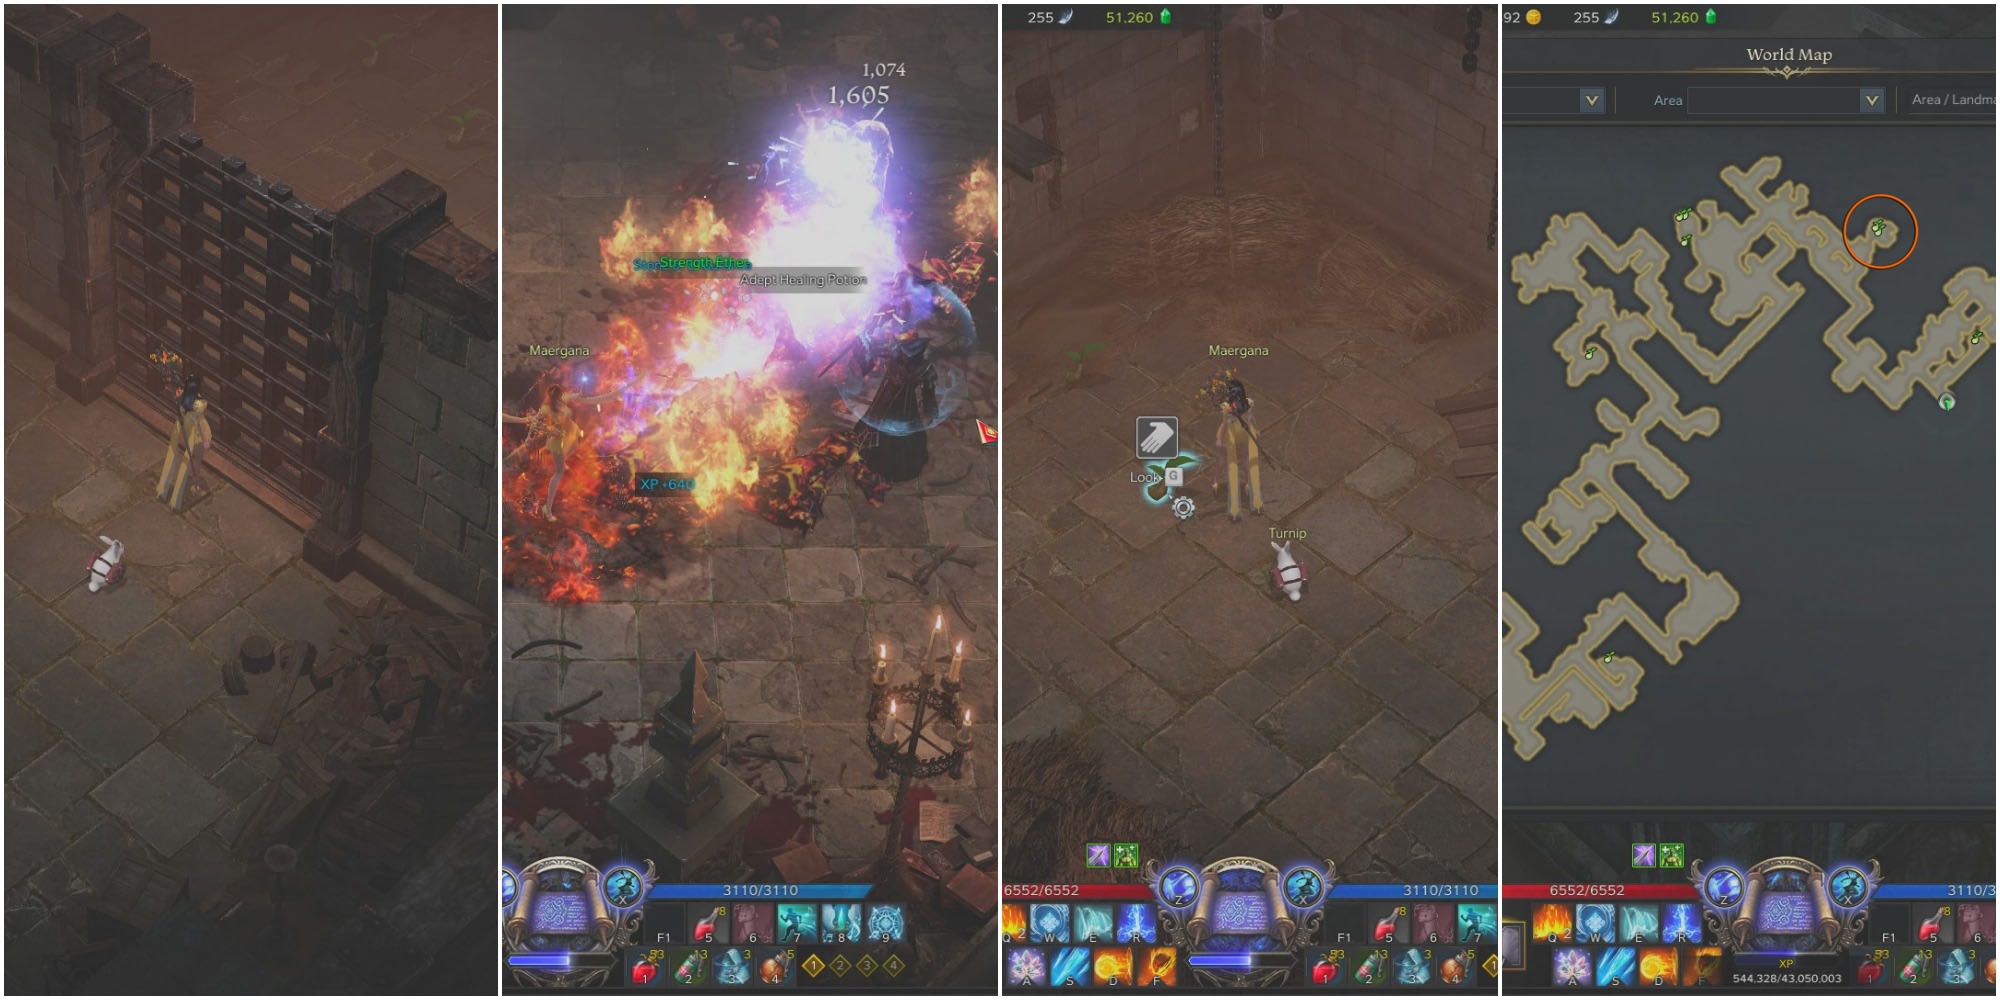 split image of player standing before gated room, player killing heretics, player finding Mokoko Seed 6, and map of blackrose basement